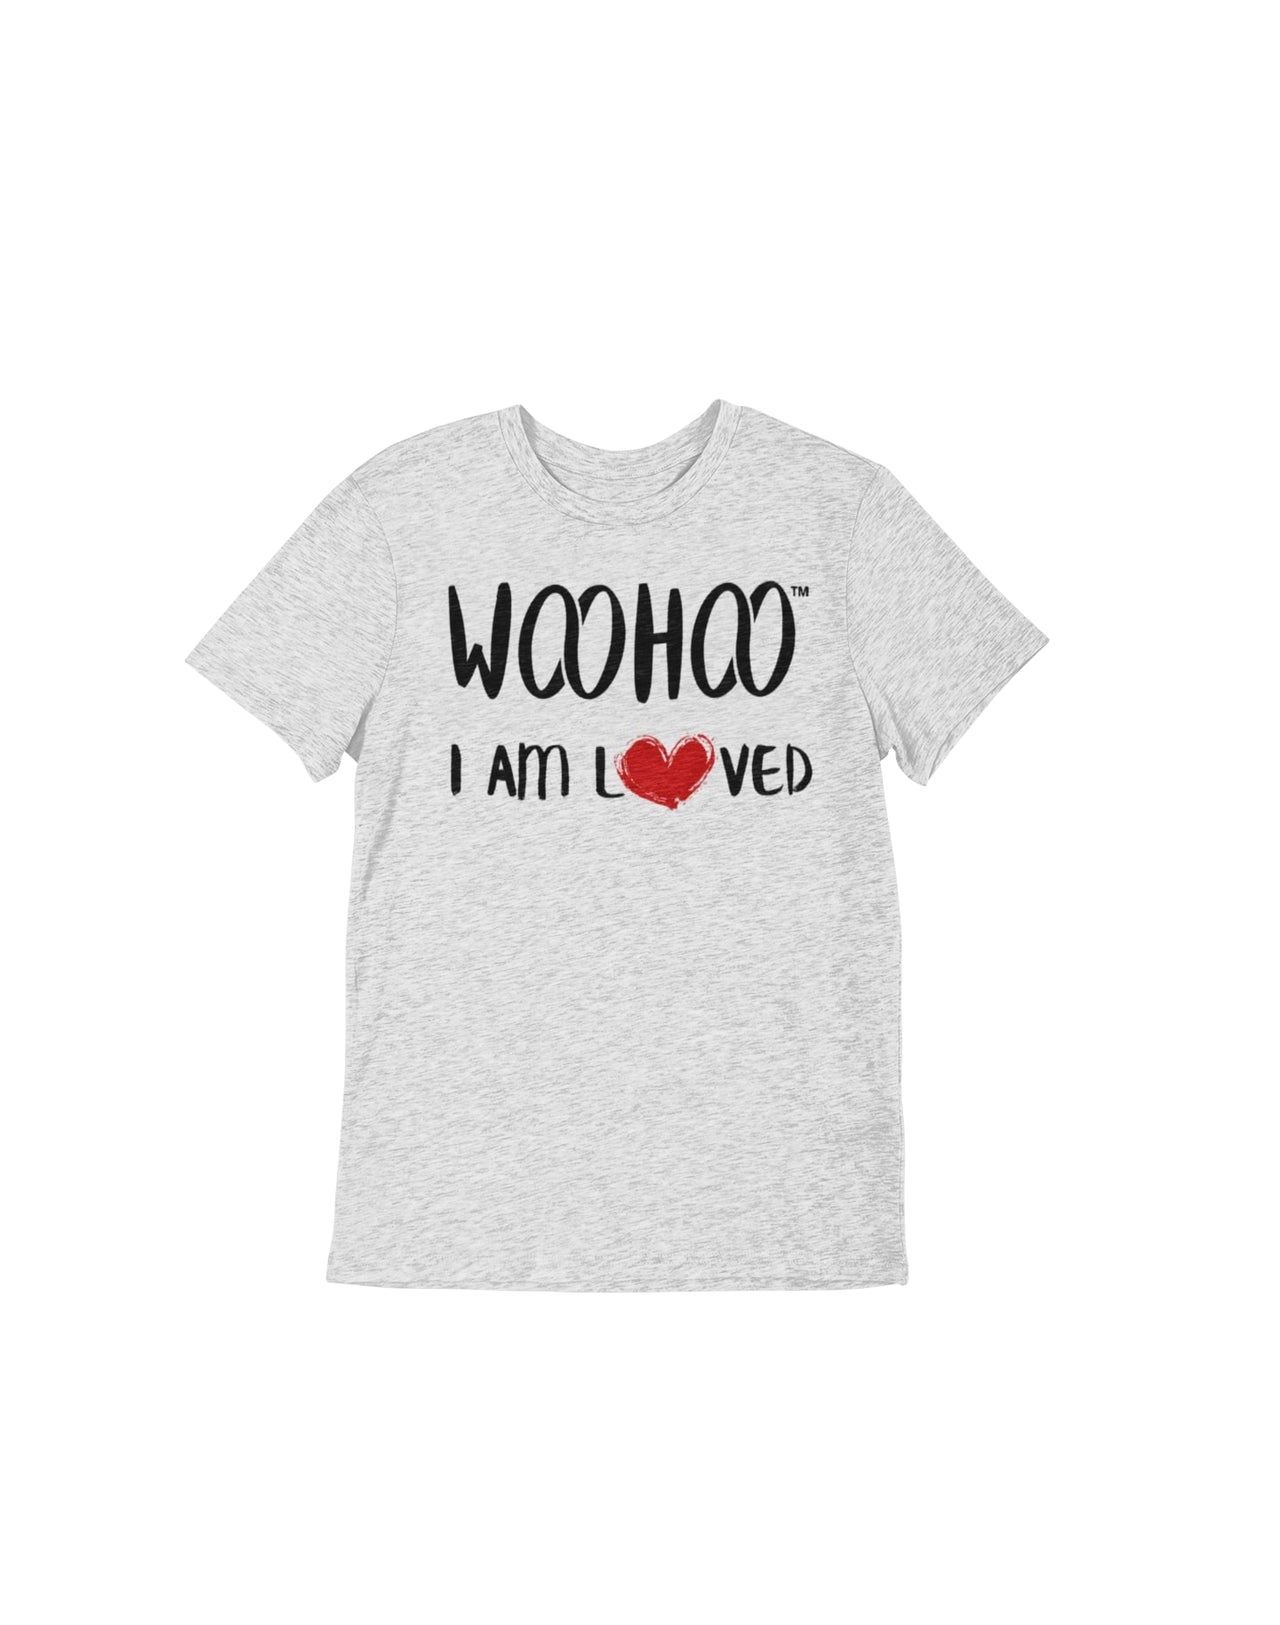 Heather Gray Unisex T-shirt with the text 'WooHoo I Am Loved,' featuring a heart for the 'O' in 'loved.' Designed by WooHoo Apparel.